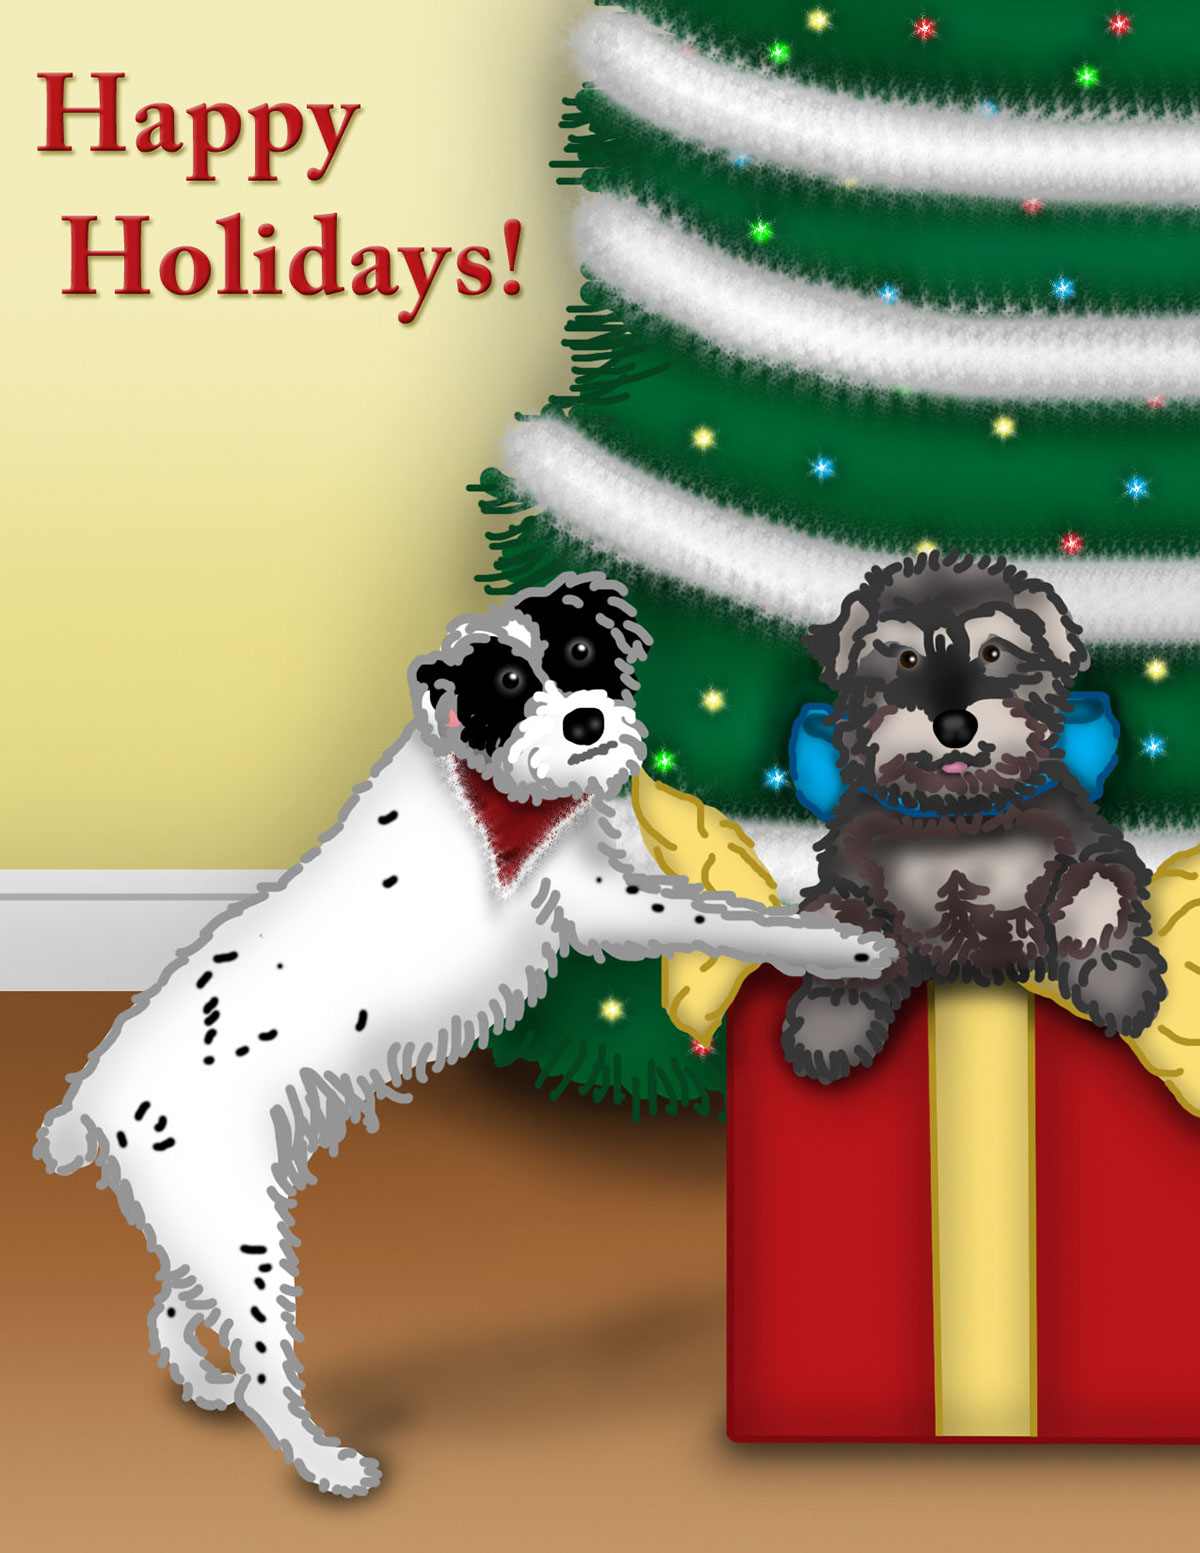 friends dogs design Holiday cards